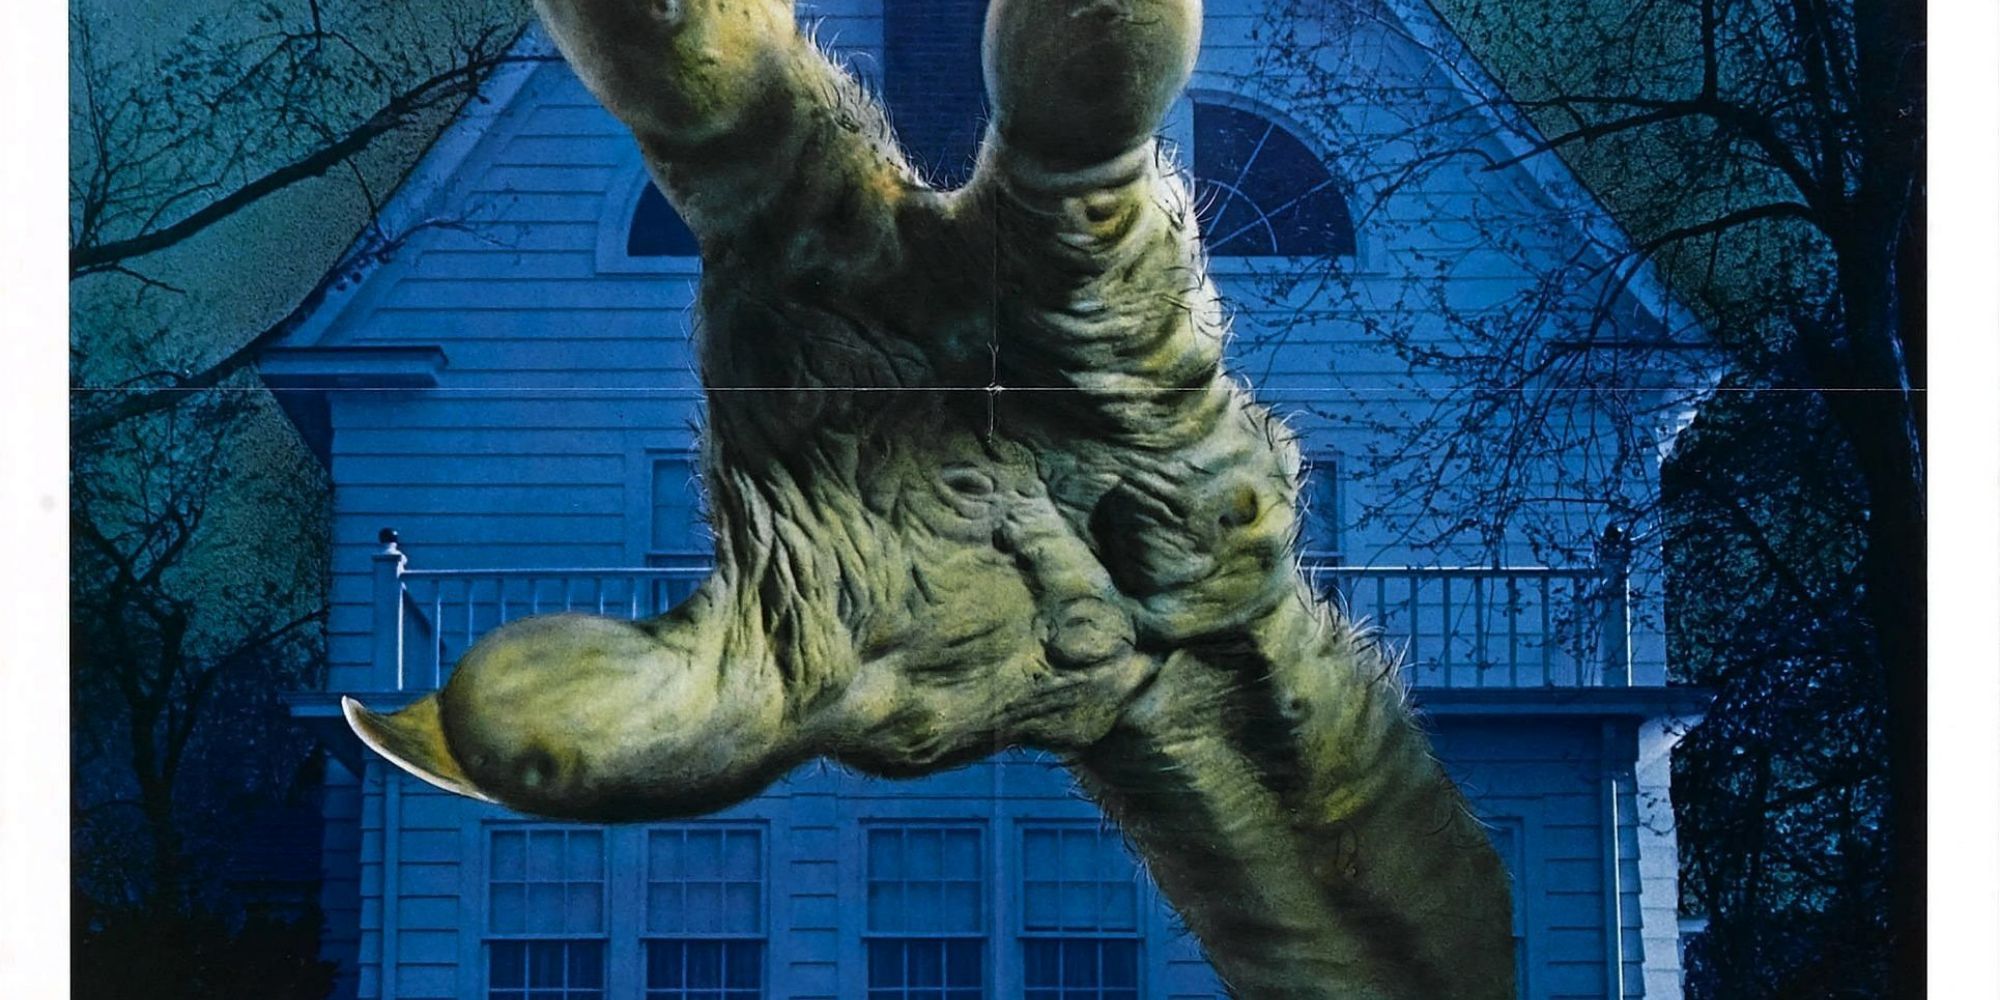 The theatrical poster for Amityville 3D, featuring a monstrous hand reaching from the house